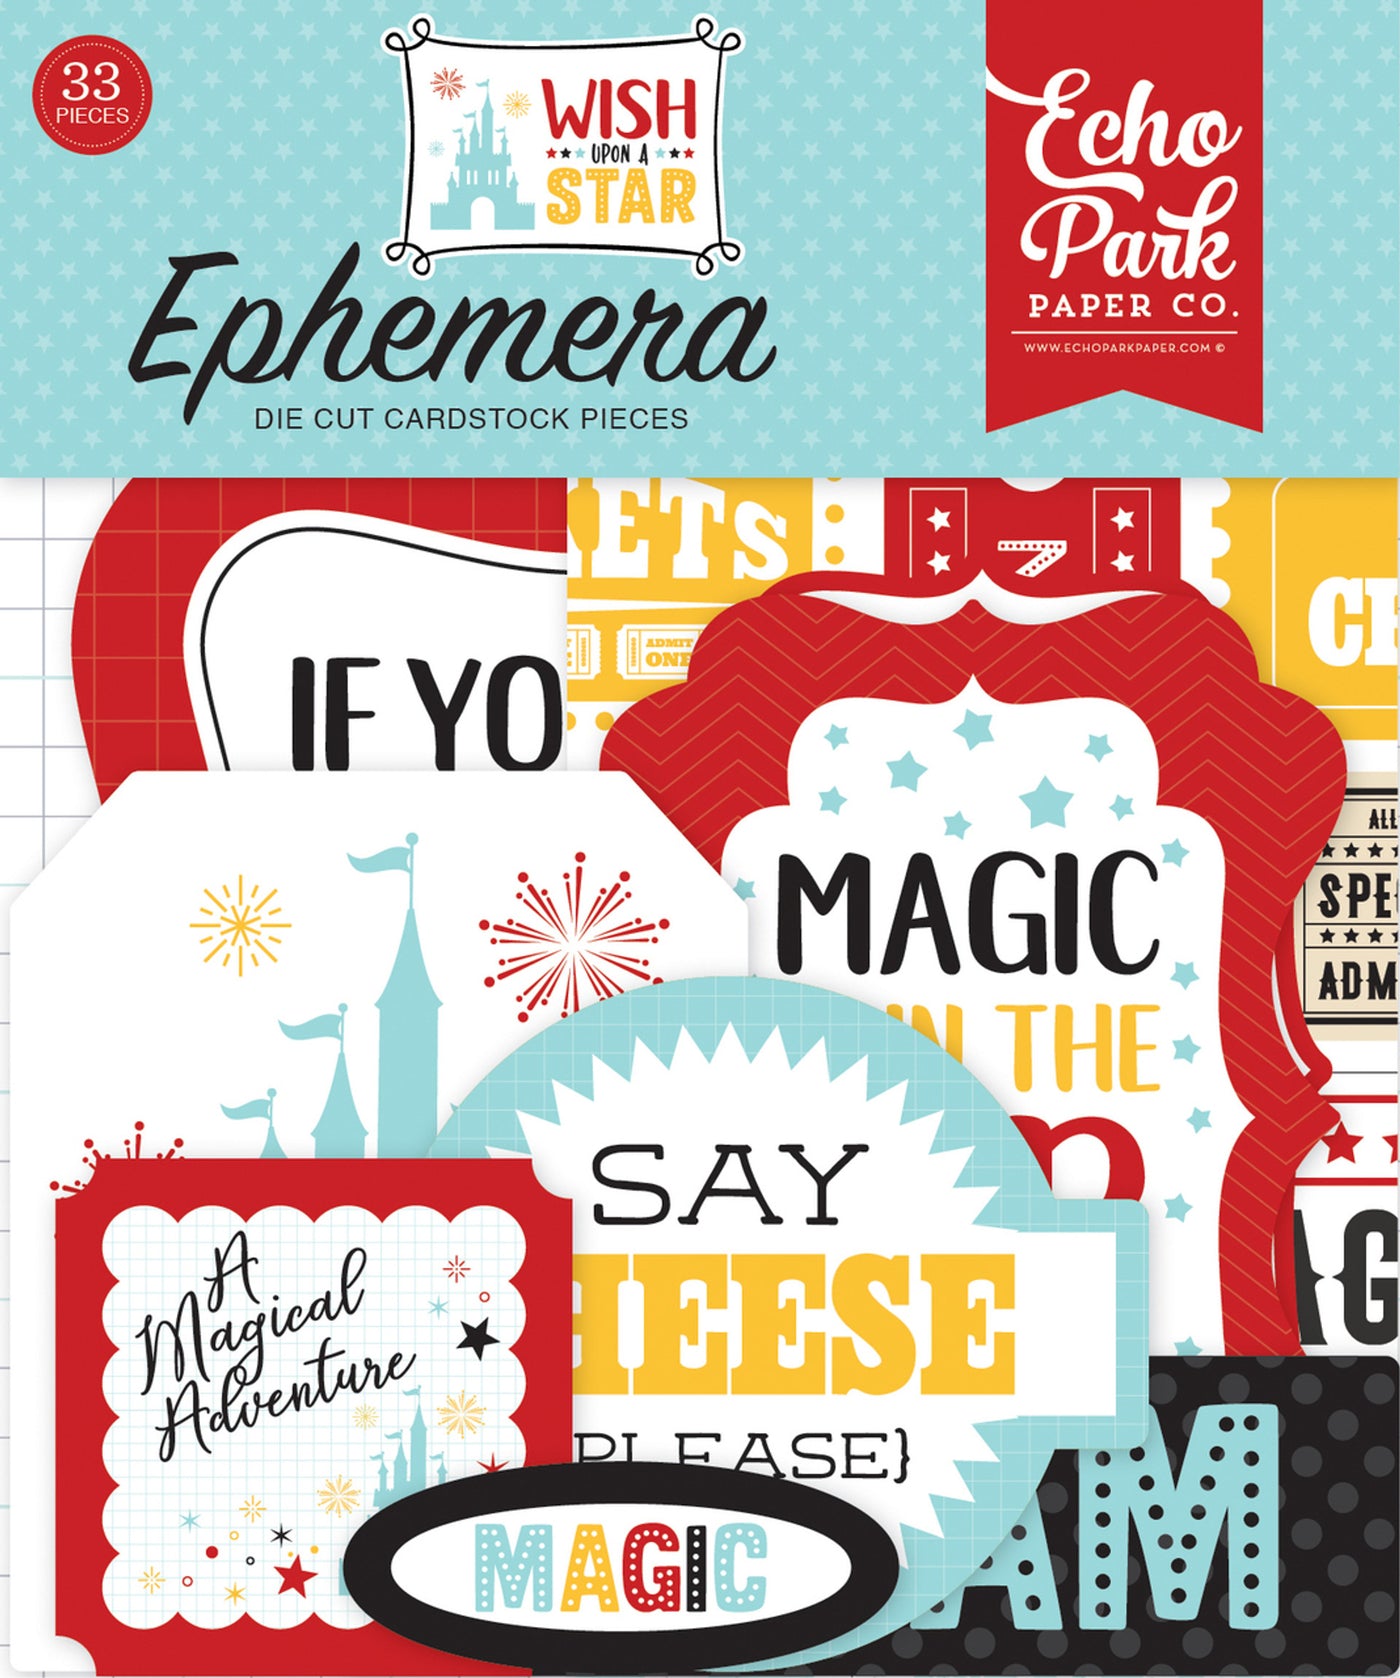 WISH UPON A STAR Ephemera Die Cut Cardstock Pack.  Pack includes 33 different die-cut shapes ready to embellish any project. 